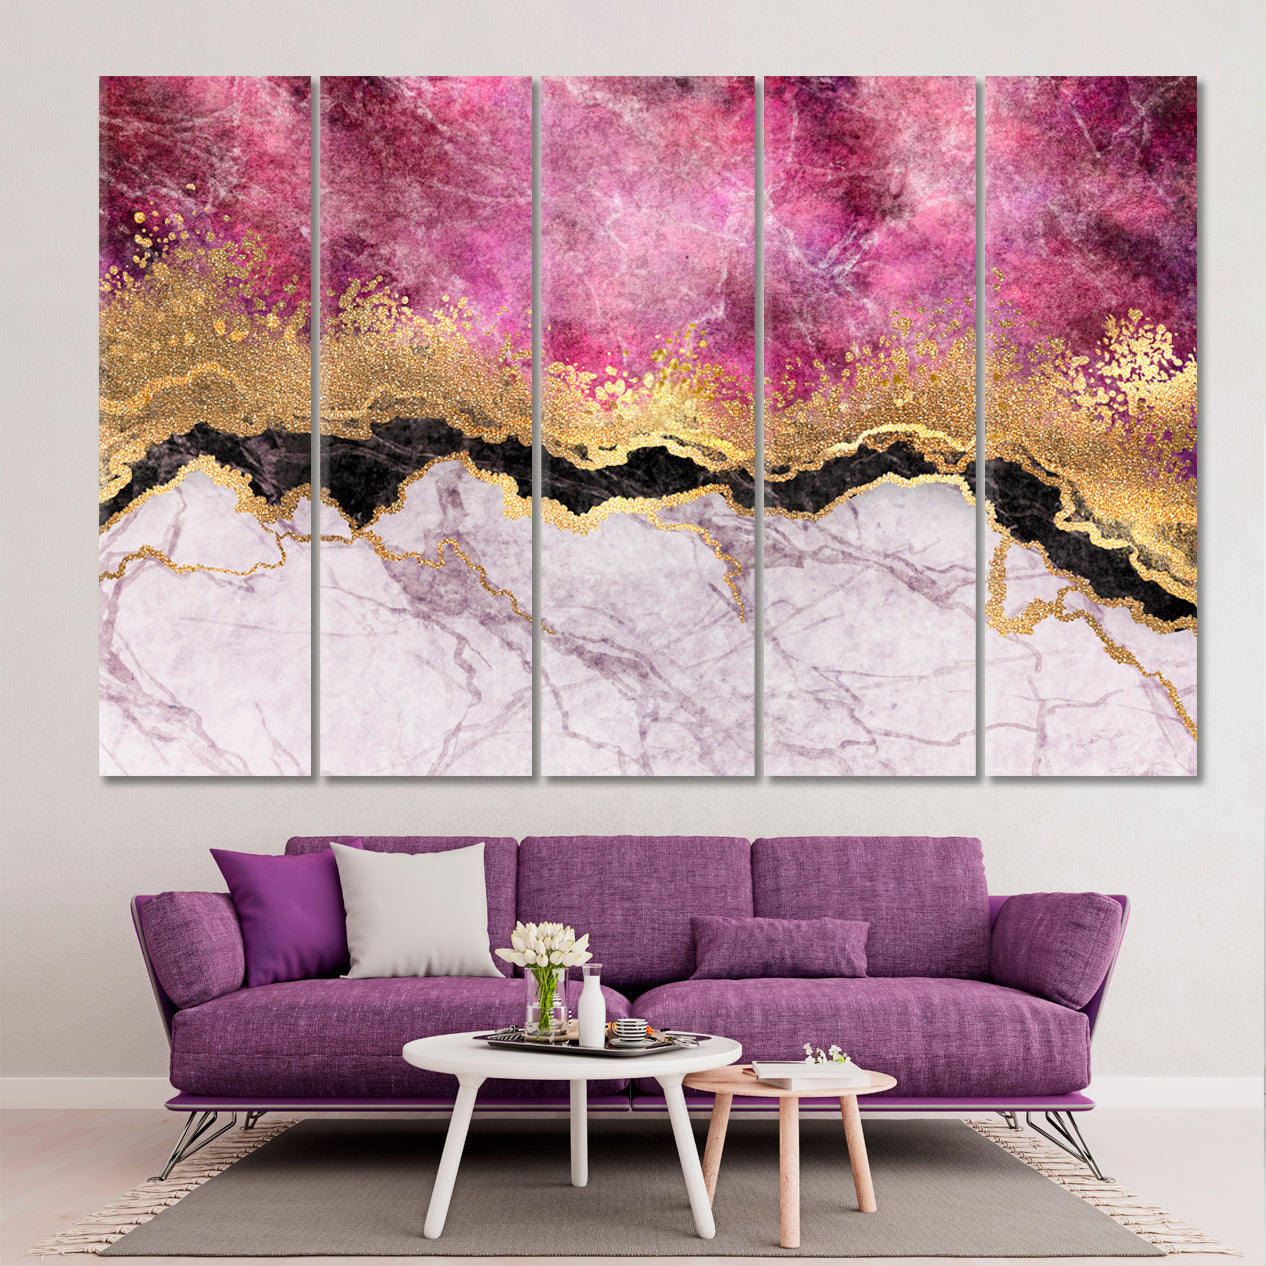 Abstract Pink Marble with Veins Stone Pattern Gold Foil Glitter Fluid Art, Oriental Marbling Canvas Print Artesty 5 panels 36" x 24" 